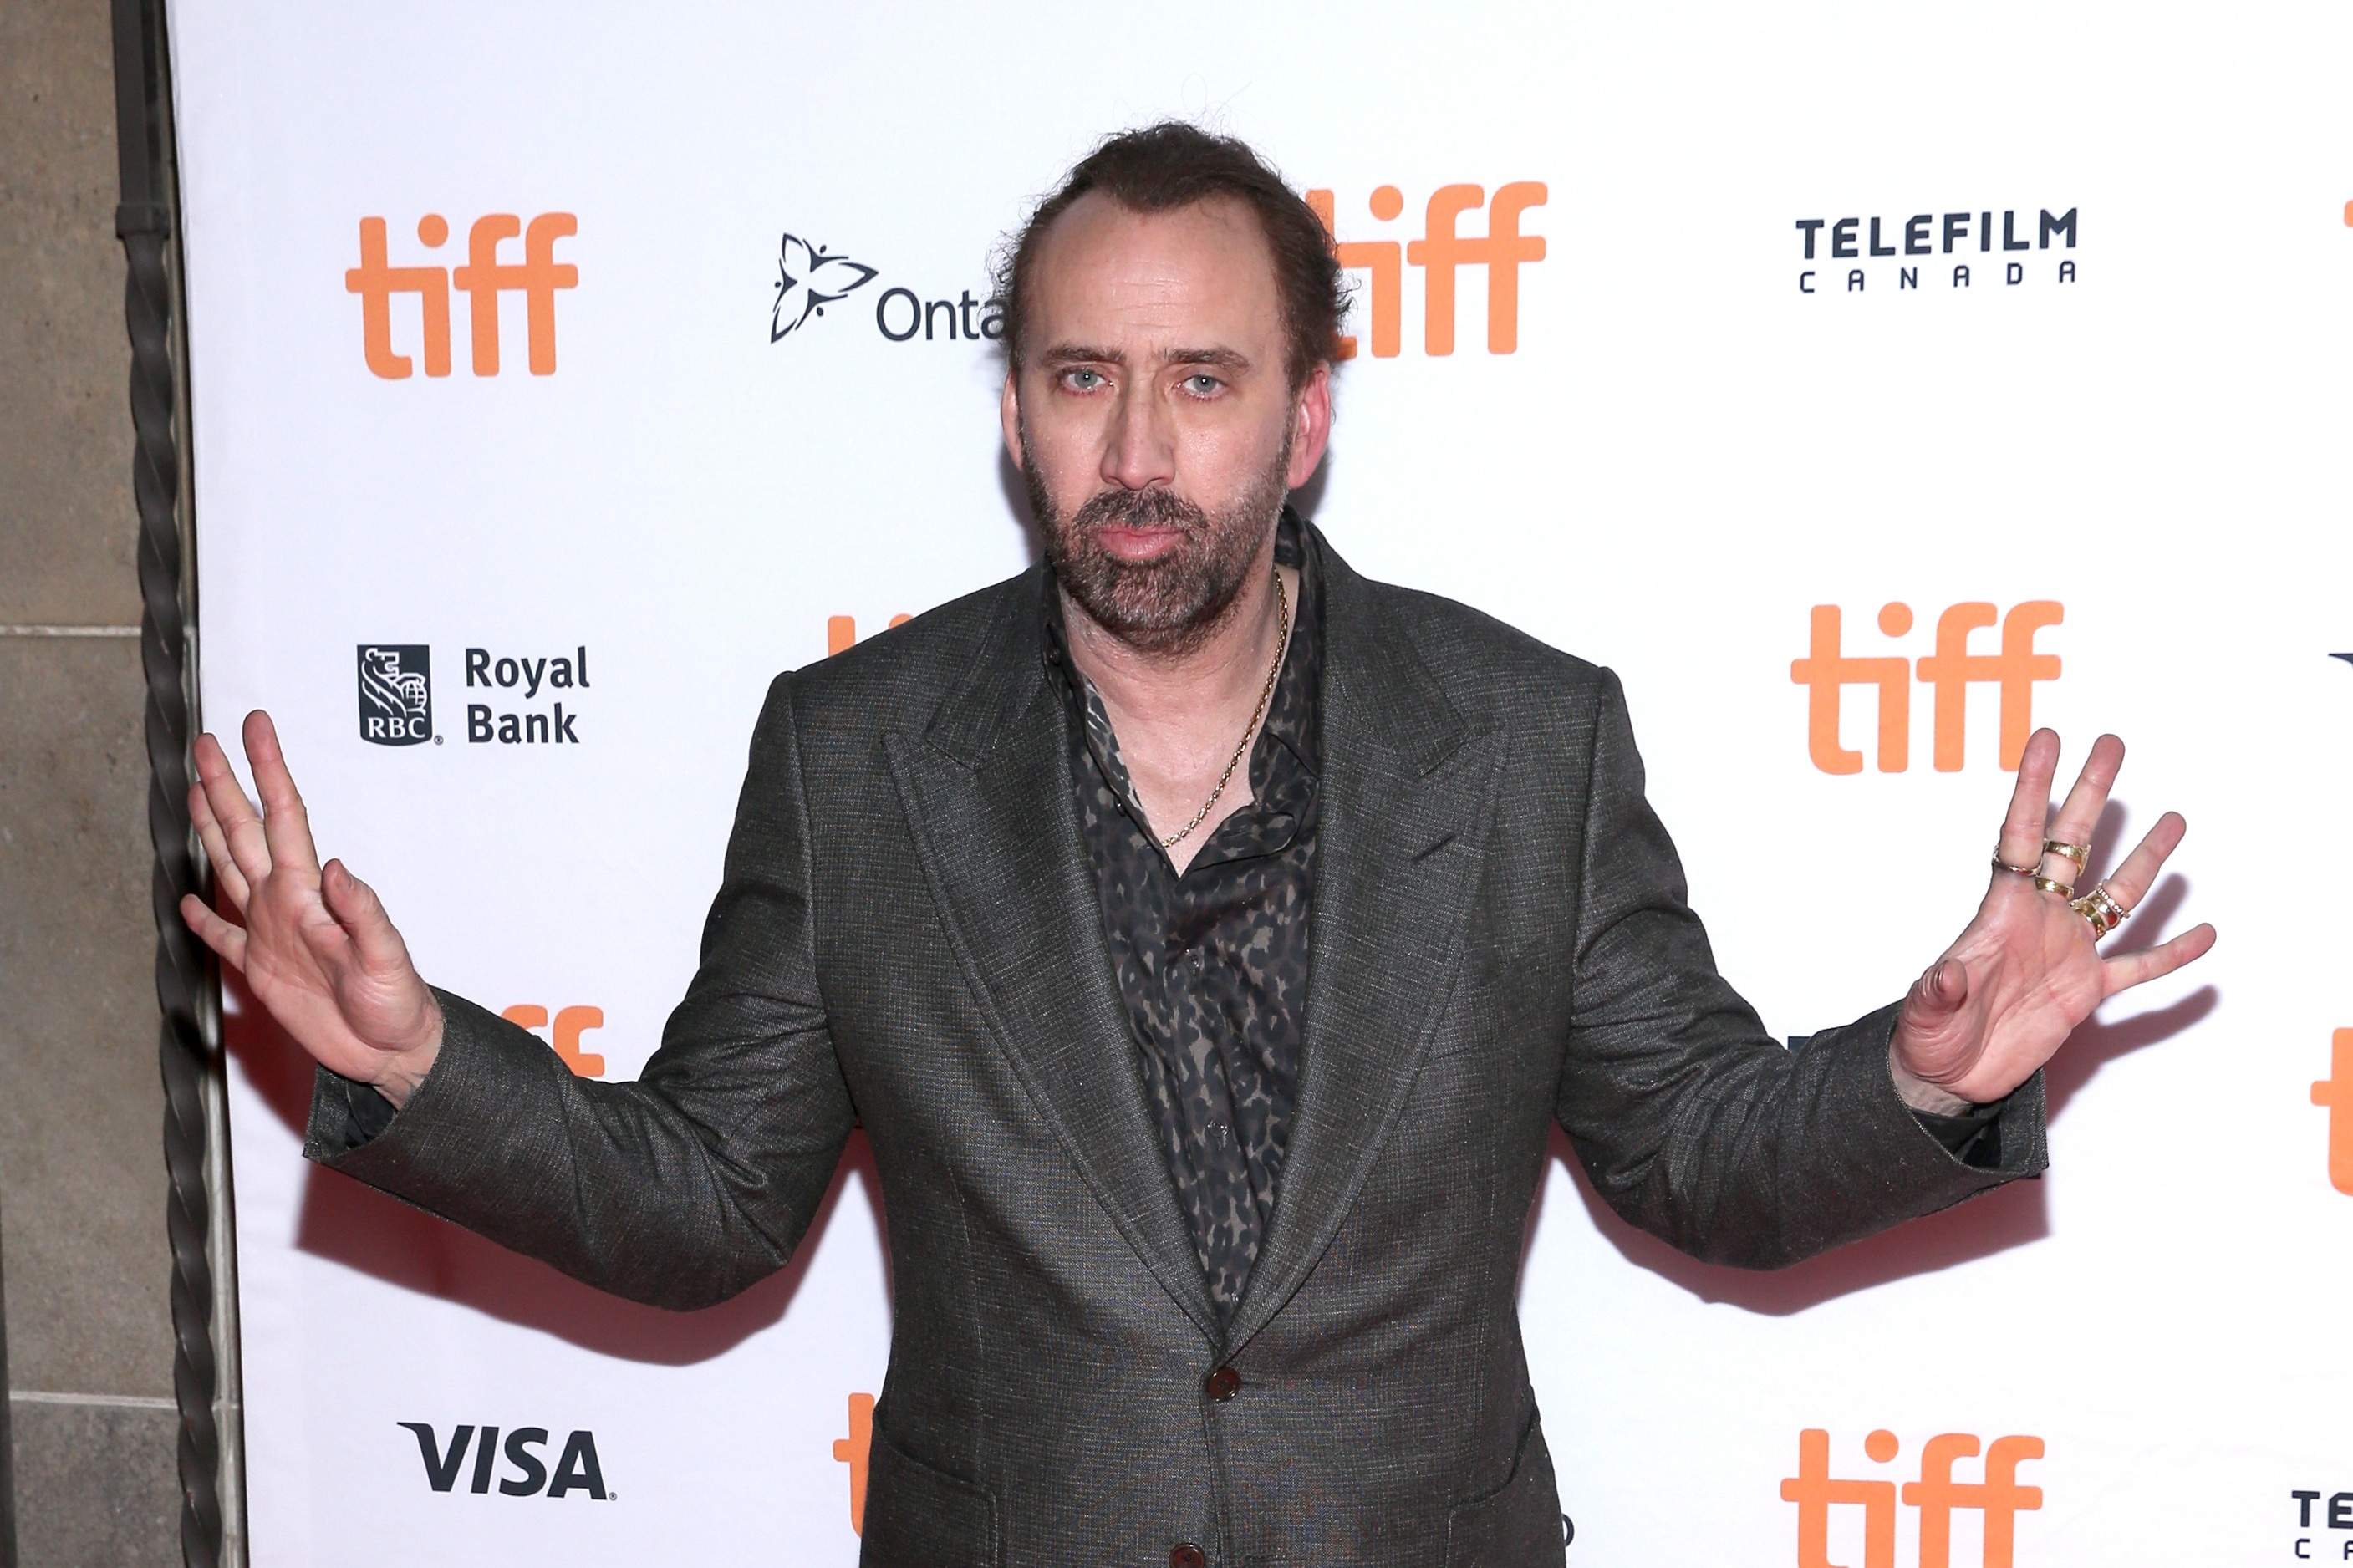 Nicolas Cage Told Marilyn Manson That He Turned $200 Into $20,000 Gambling and Gave It to Charity